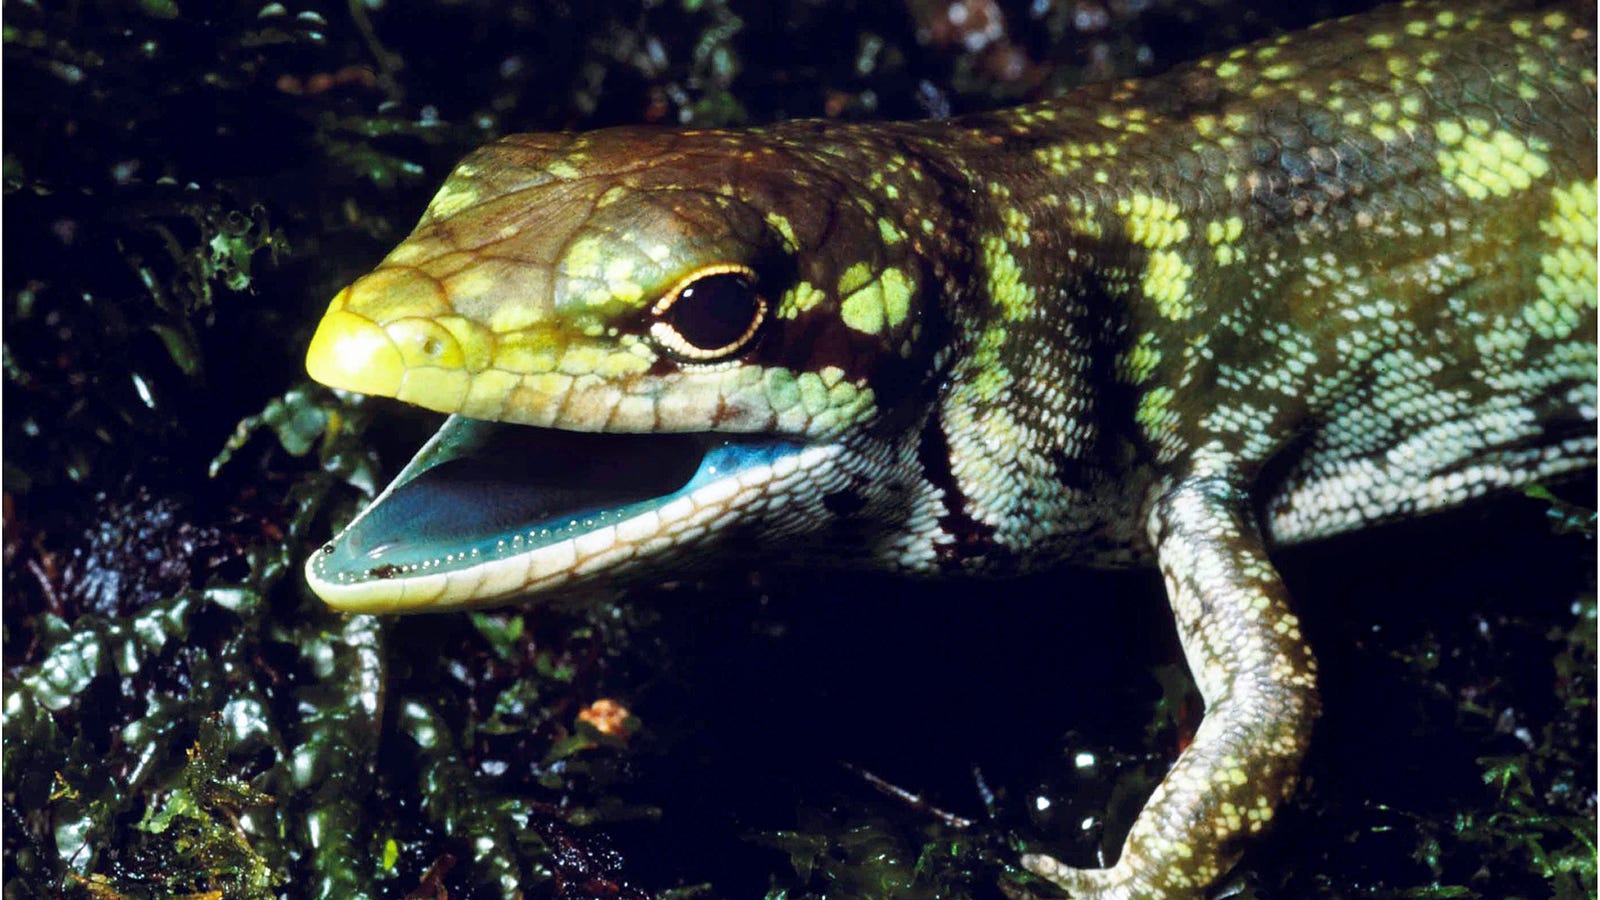 This bizarre lizard bleeds green poison that can kill you